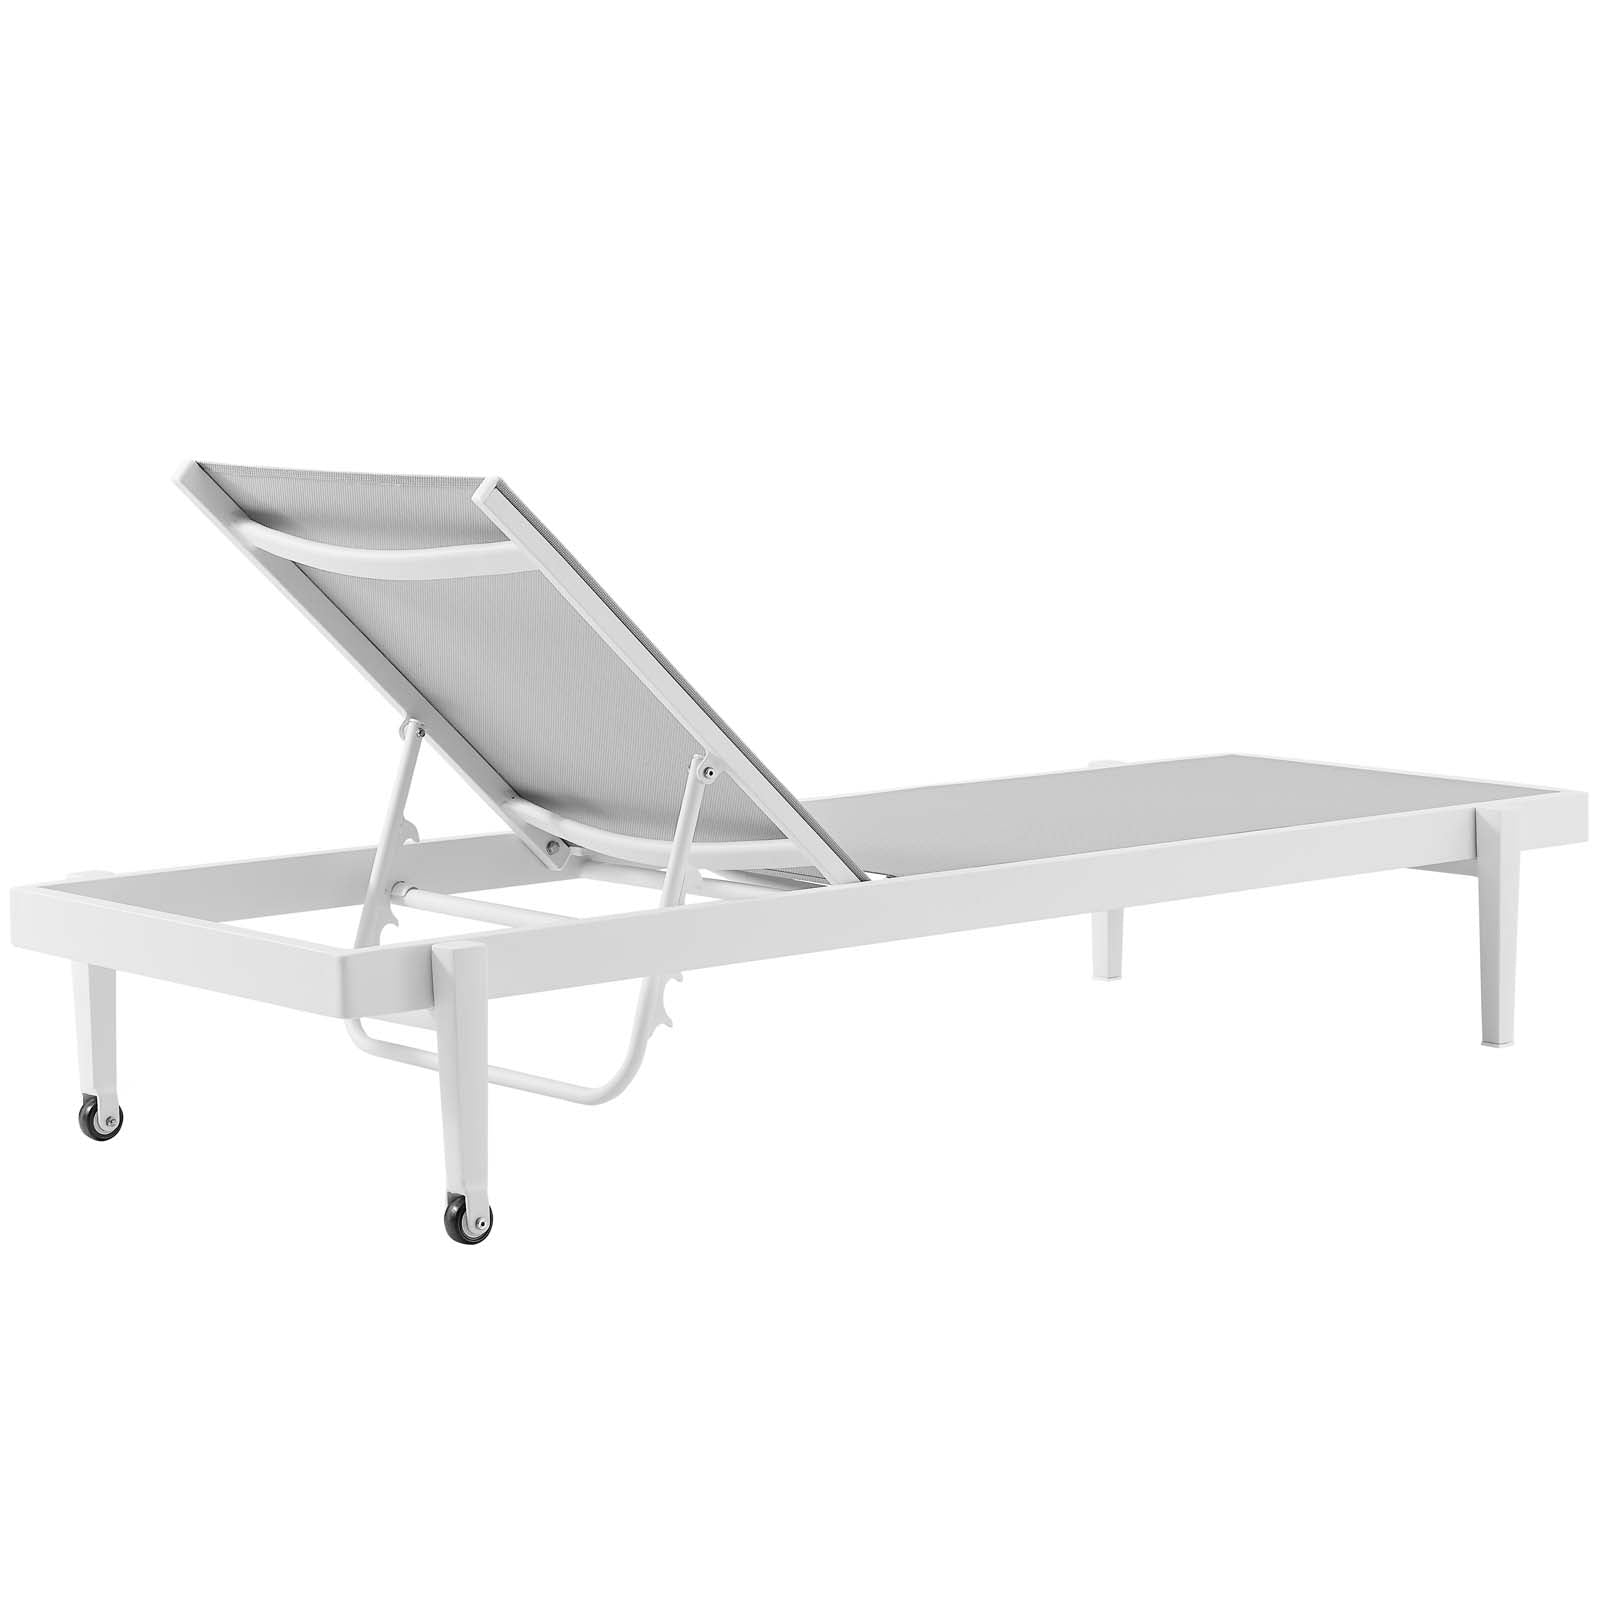 Modway Outdoor Loungers - Charleston Outdoor Patio Aluminum Chaise Lounge Chair Set of 4 White Gray